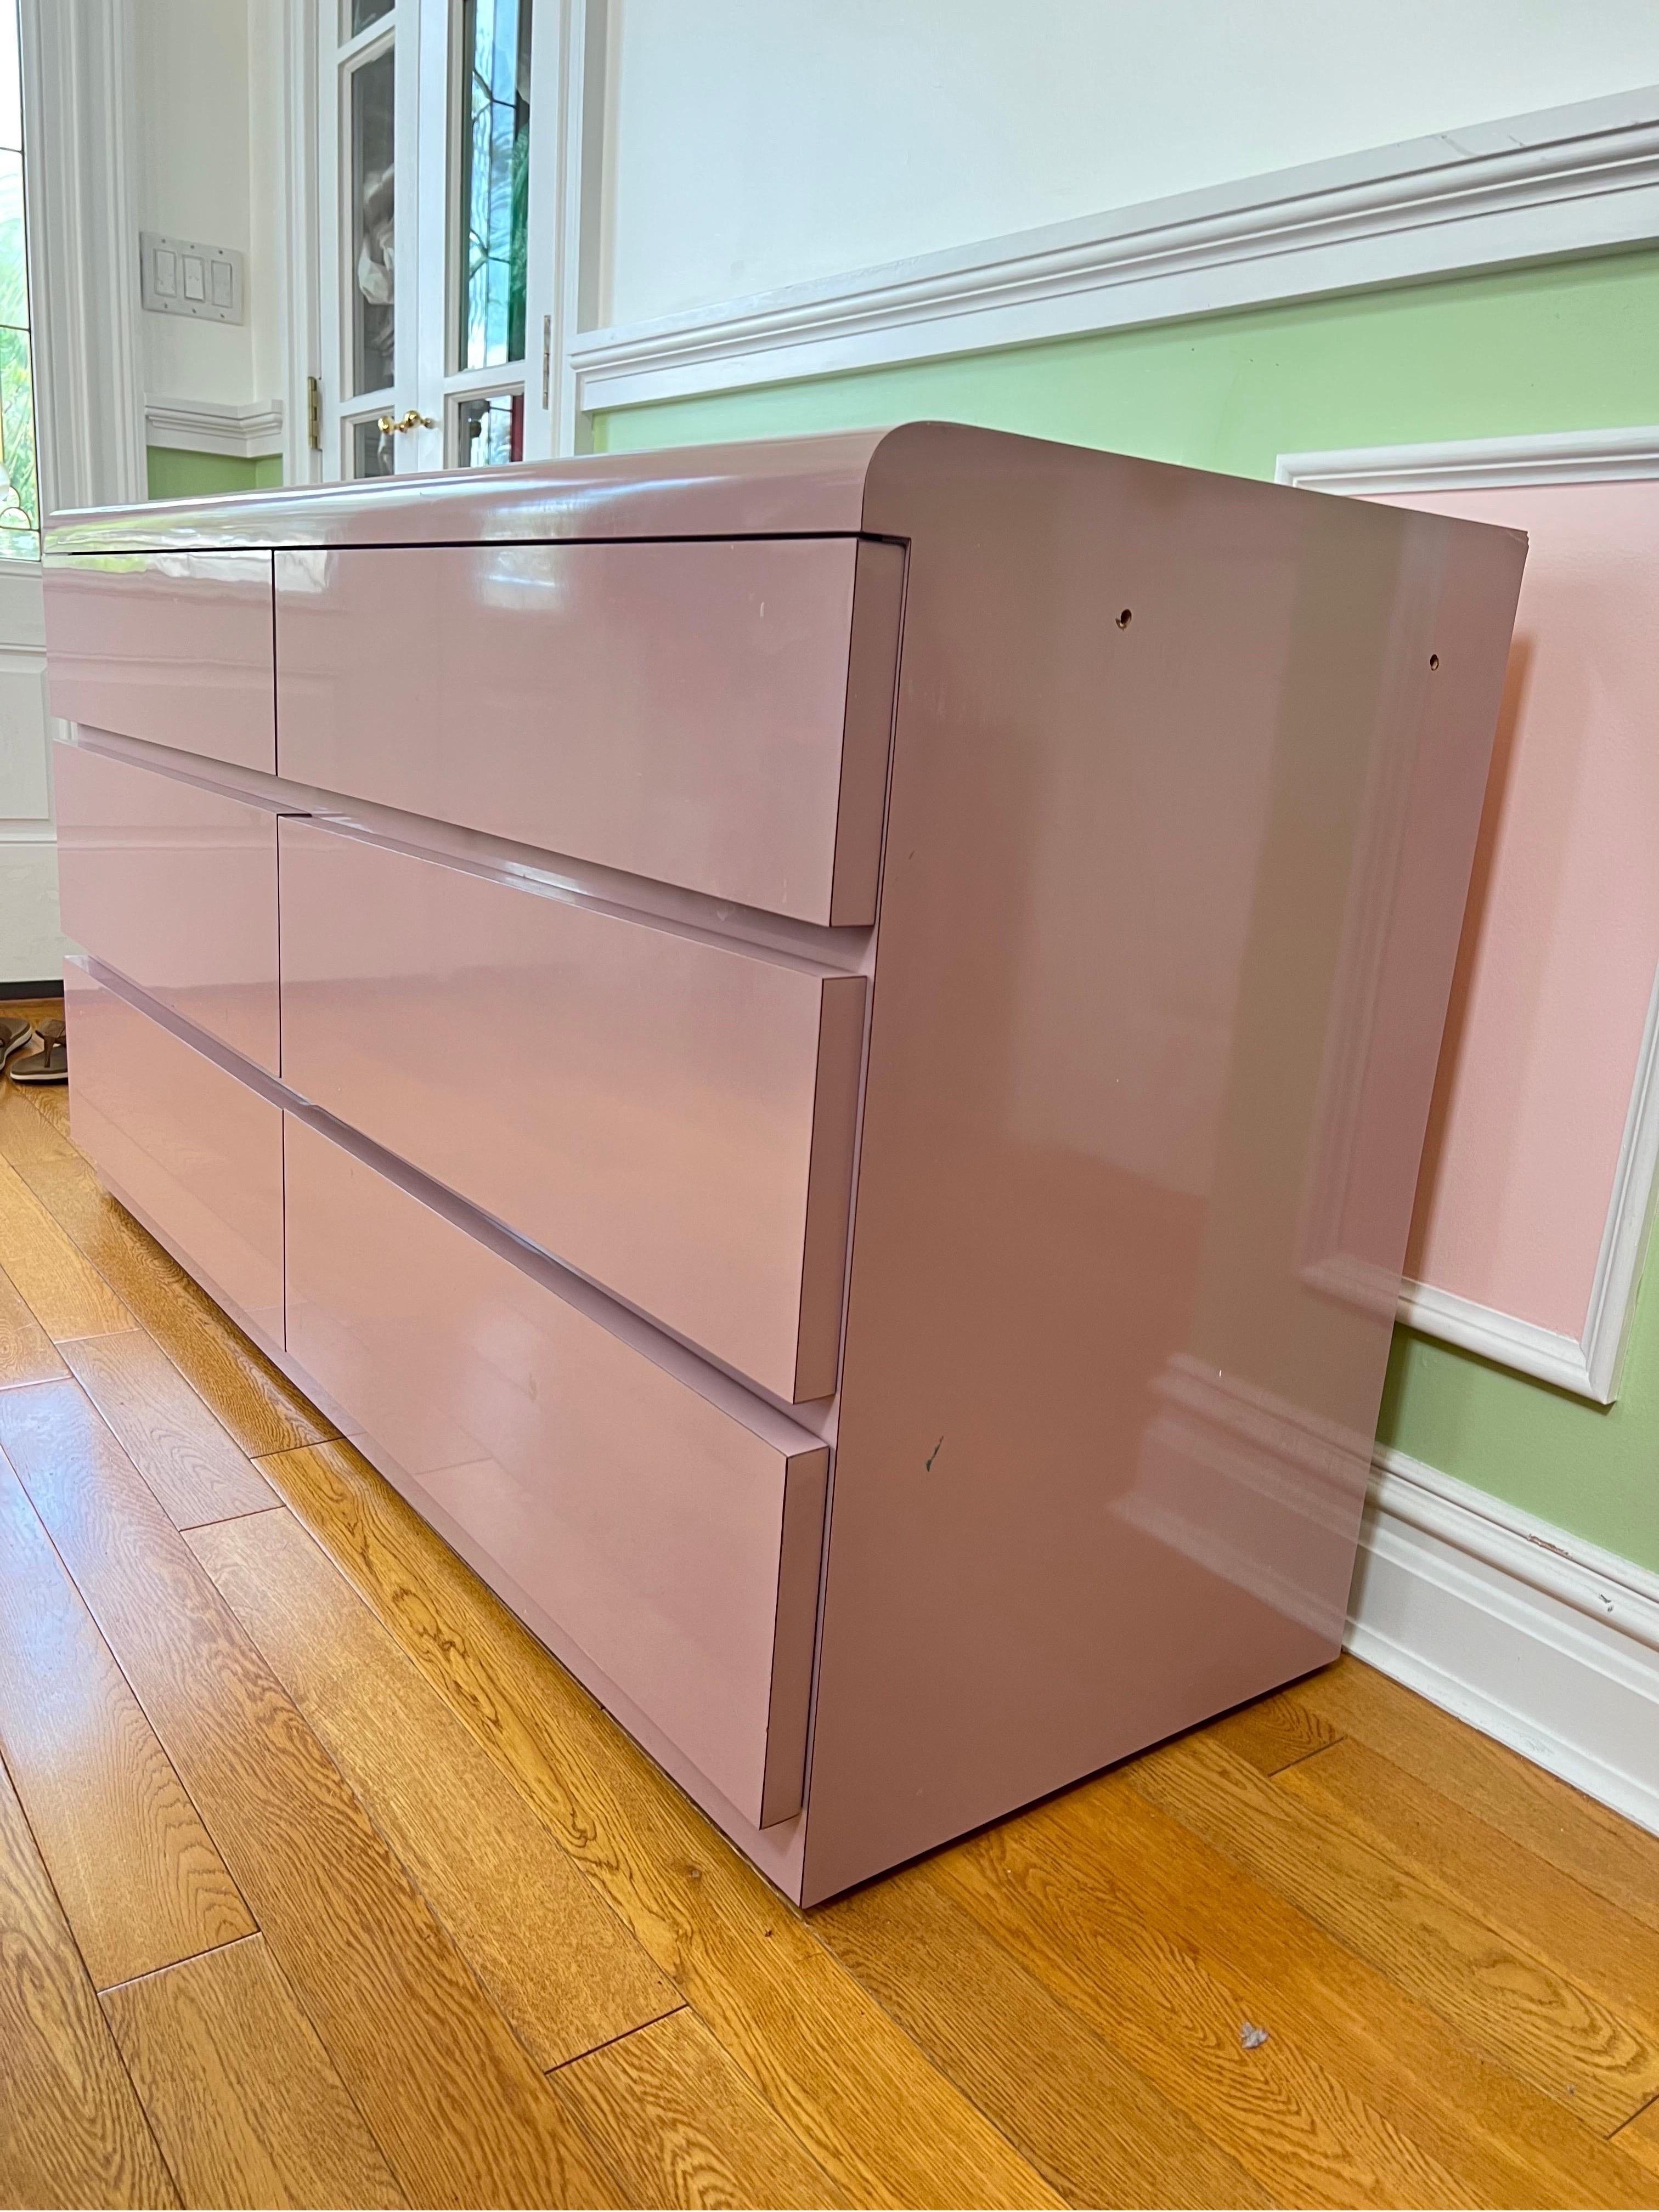 Custom made pink laminate 6 drawers dresser

Minor defects on one corner edge and different back or bottom edge